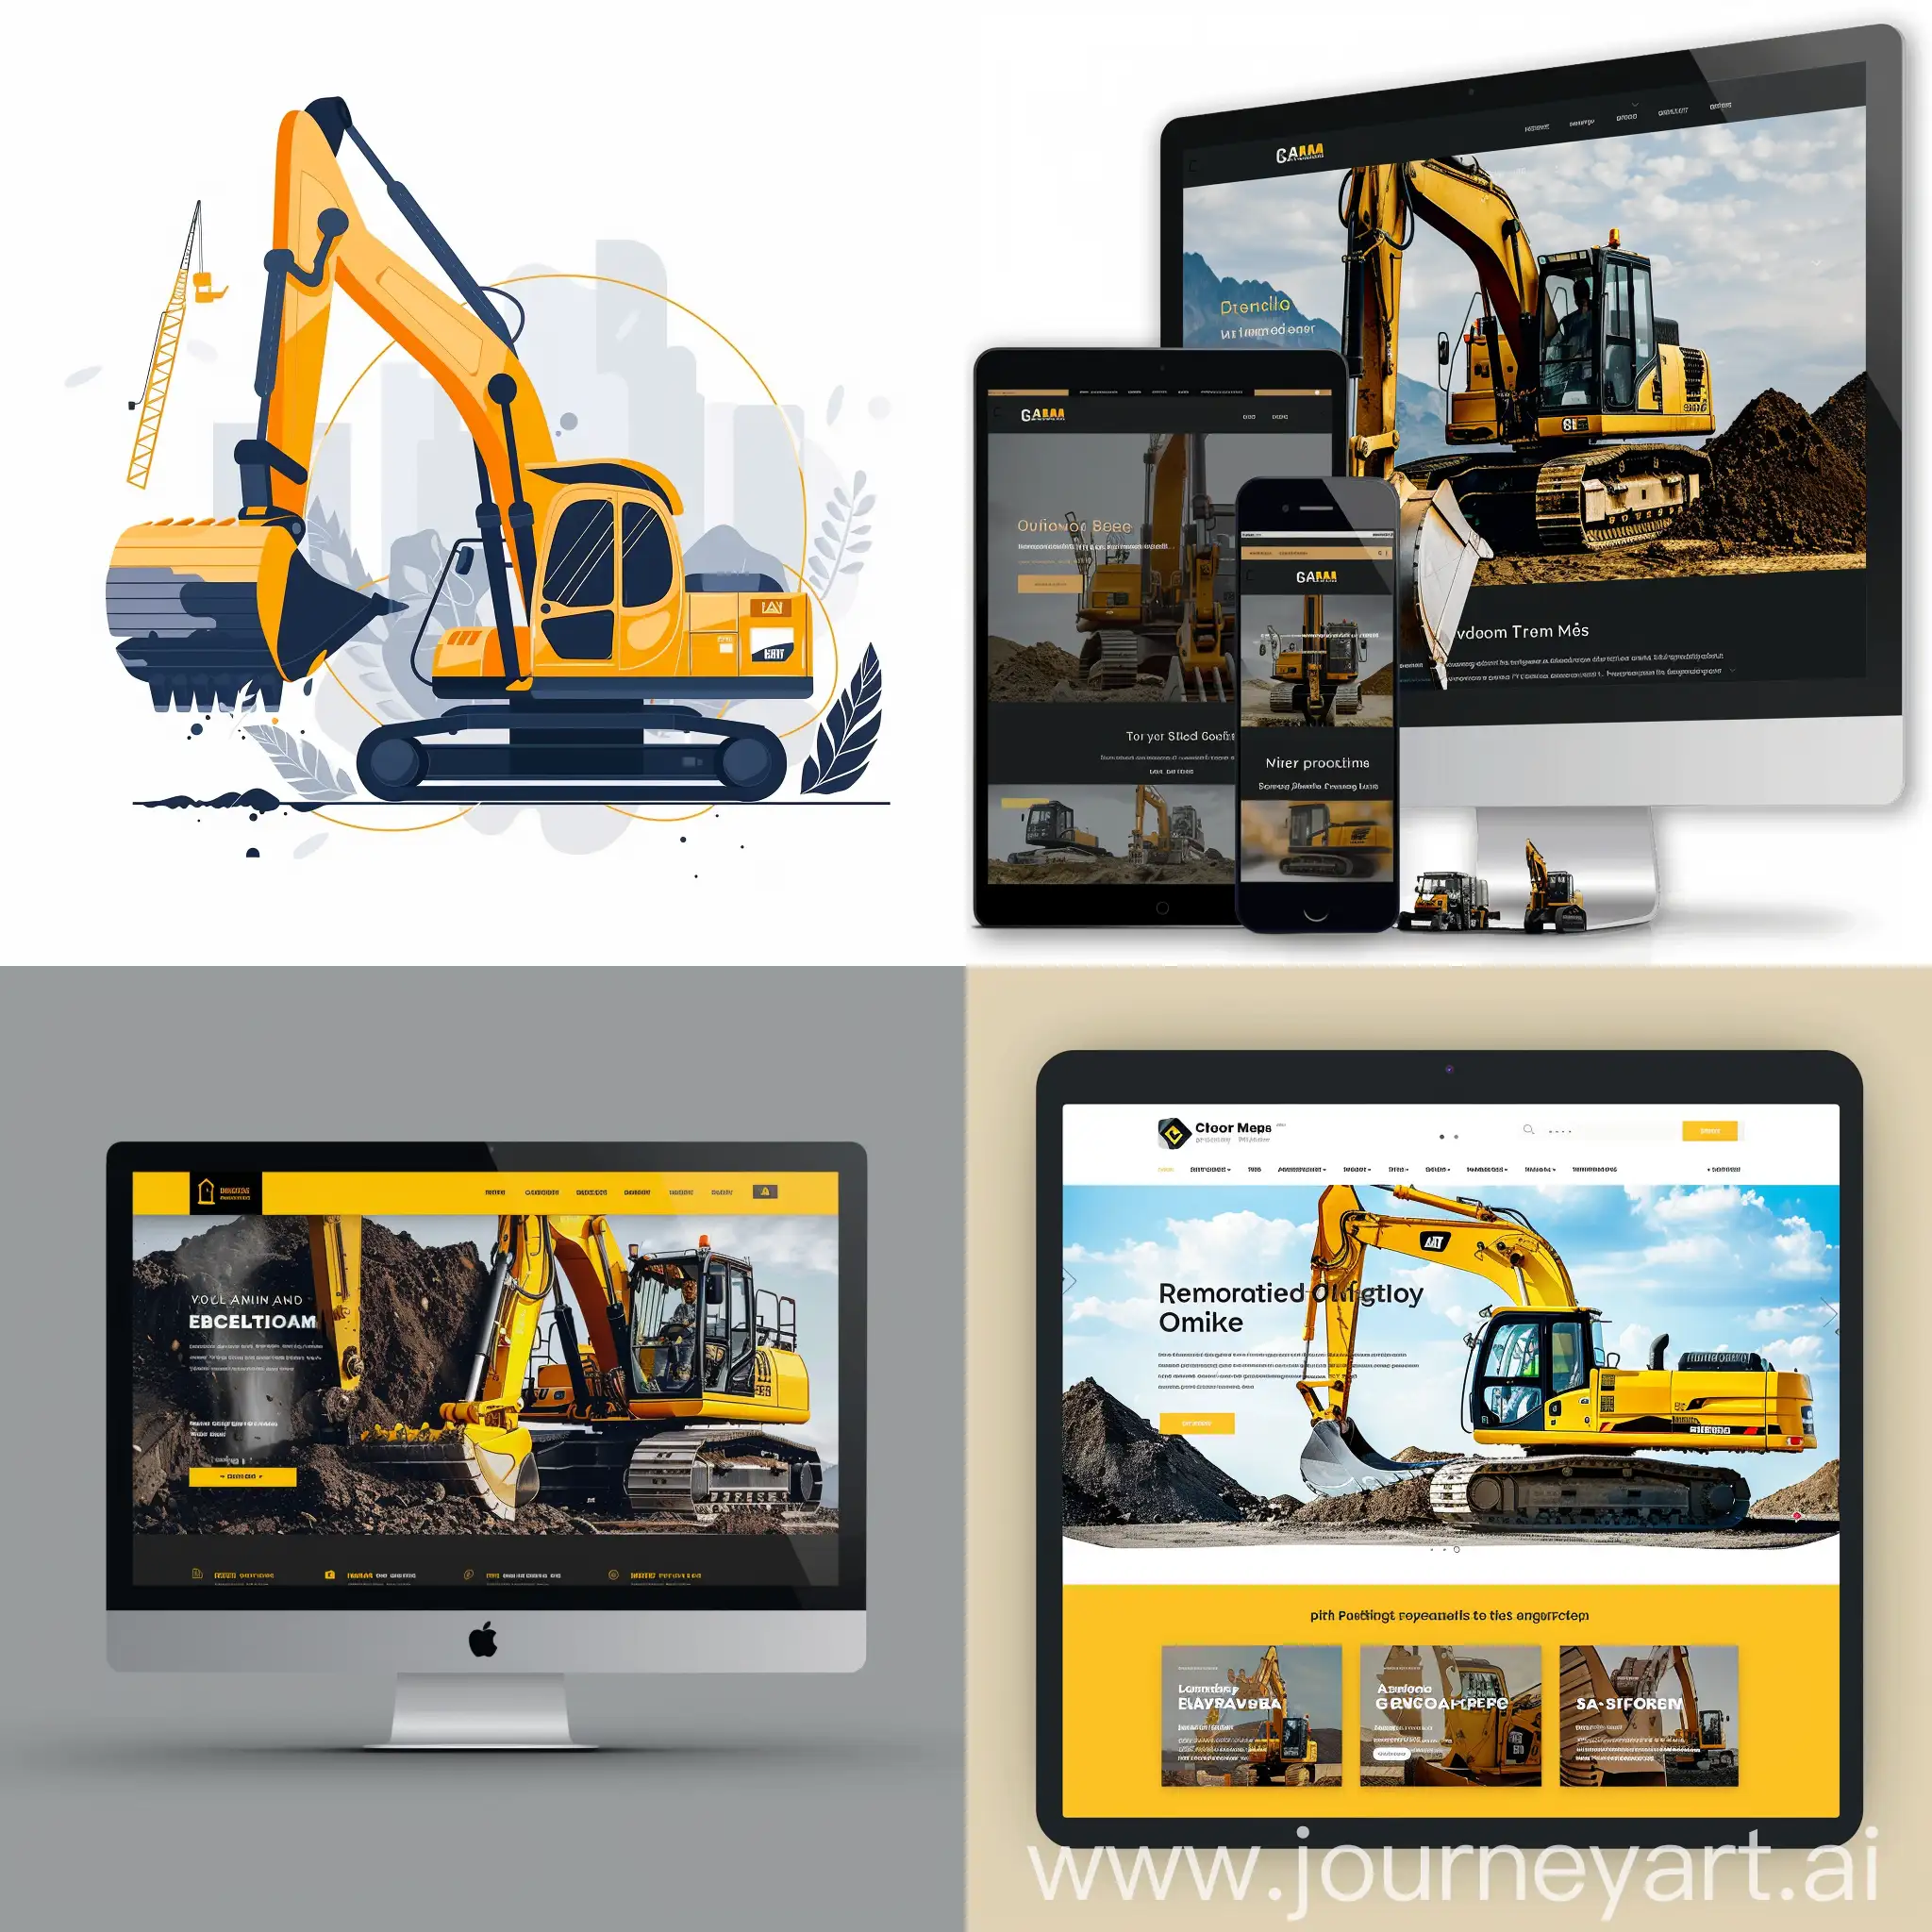 website for renting heavy construction equipment in a minimalistic style